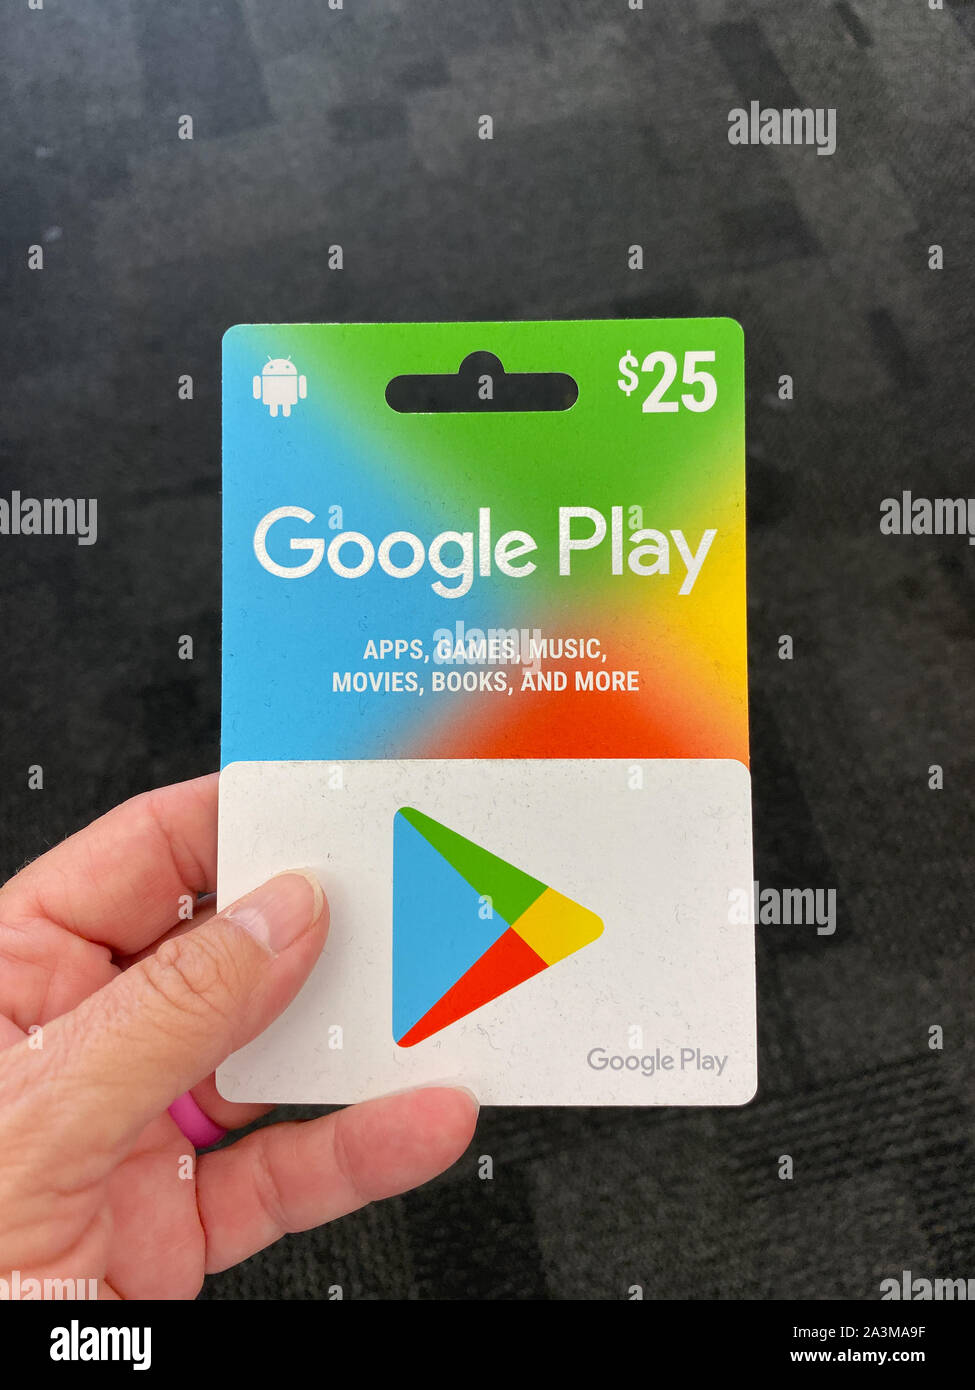 Orlando,FL/USA-10/7/19: A Google Play gift card ready for a person to purchase as the perfect gift for a family member or friend. Stock Photo